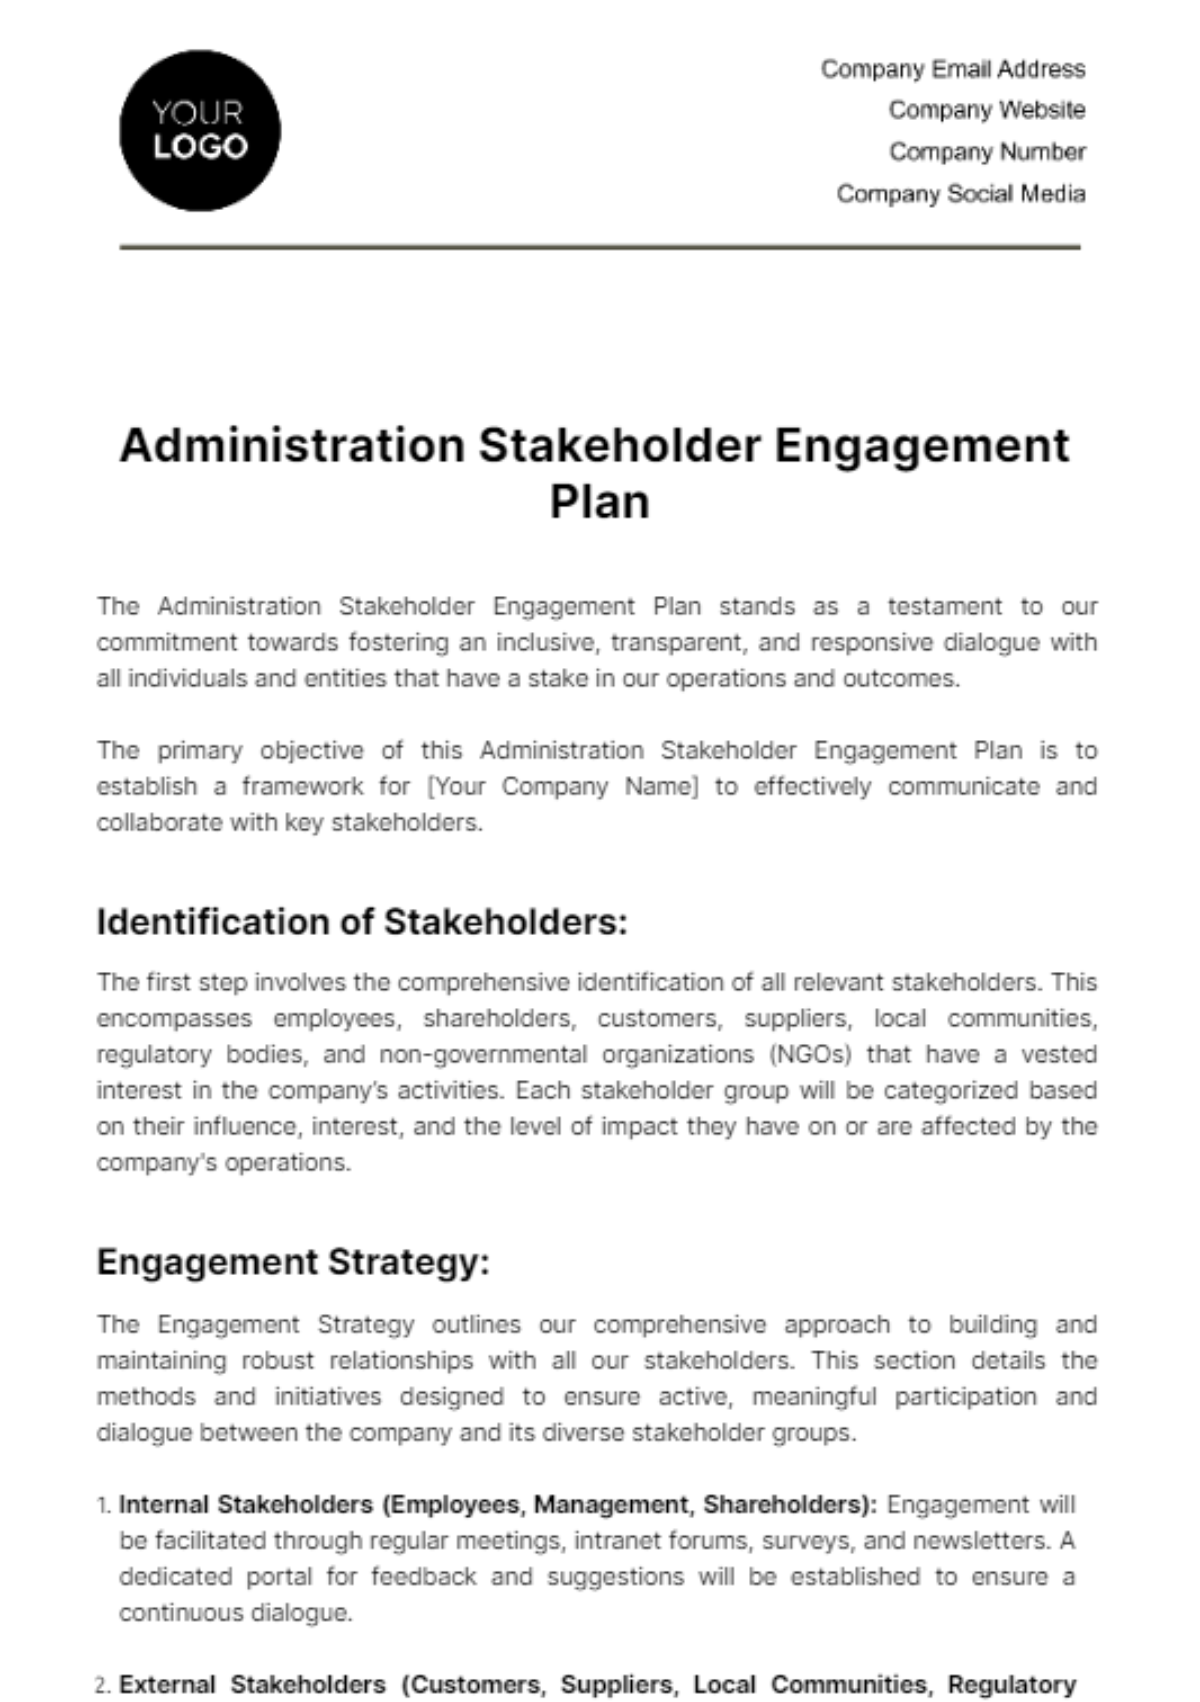 Administration Stakeholder Engagement Plan Template